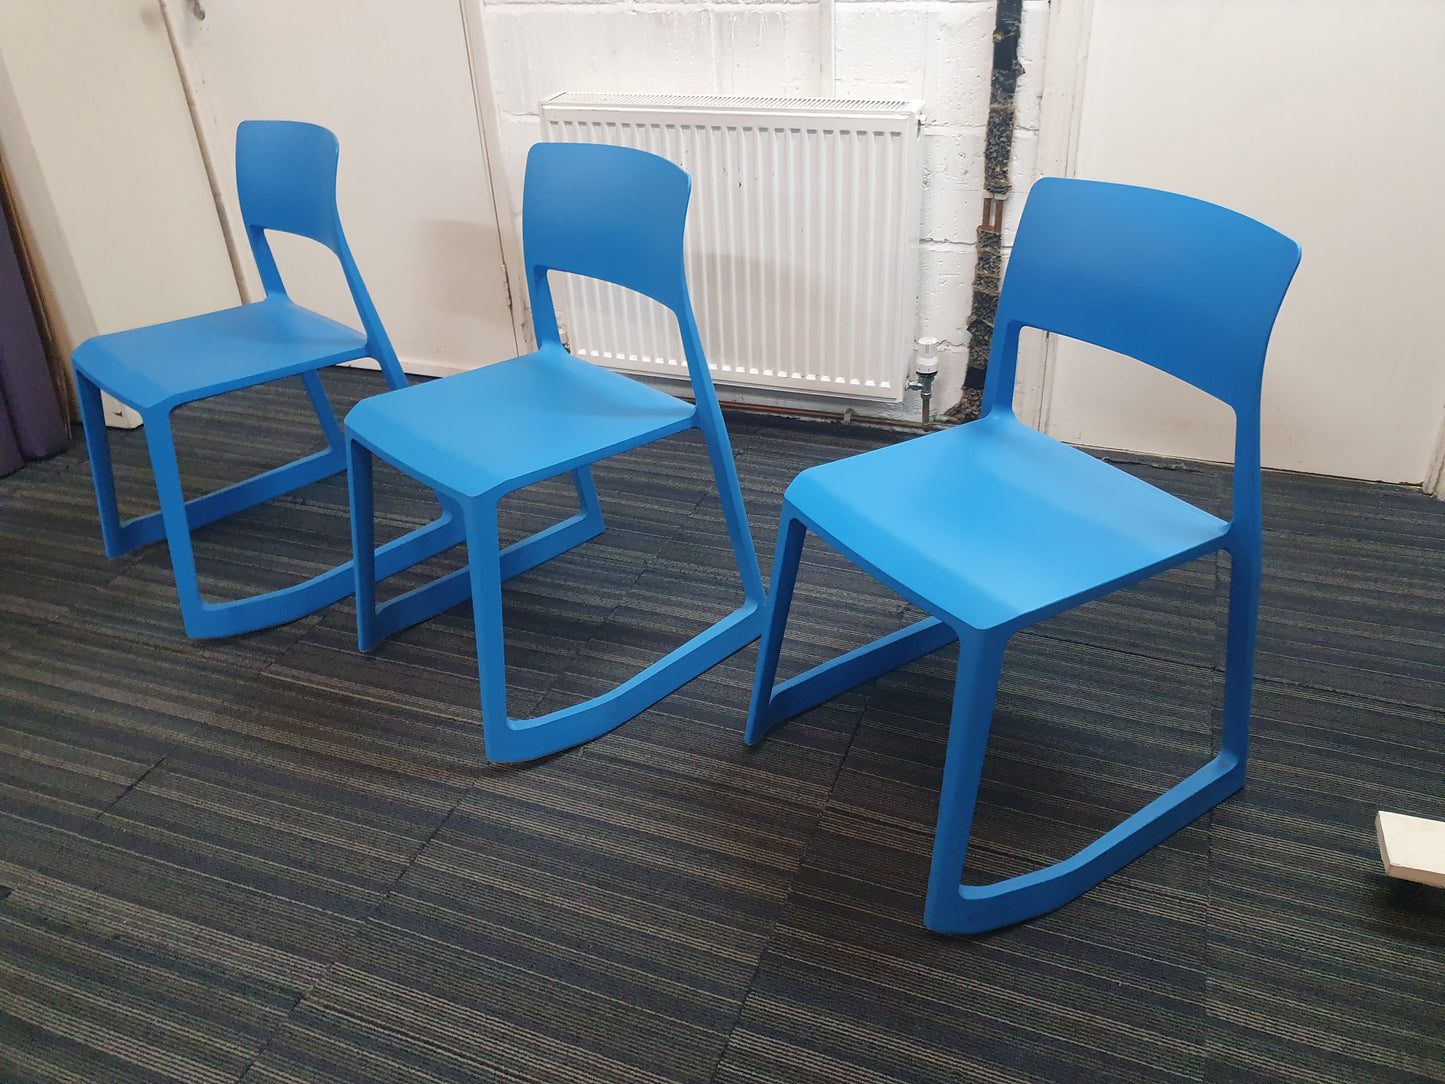 Azure blue reception chairs in front of radiator